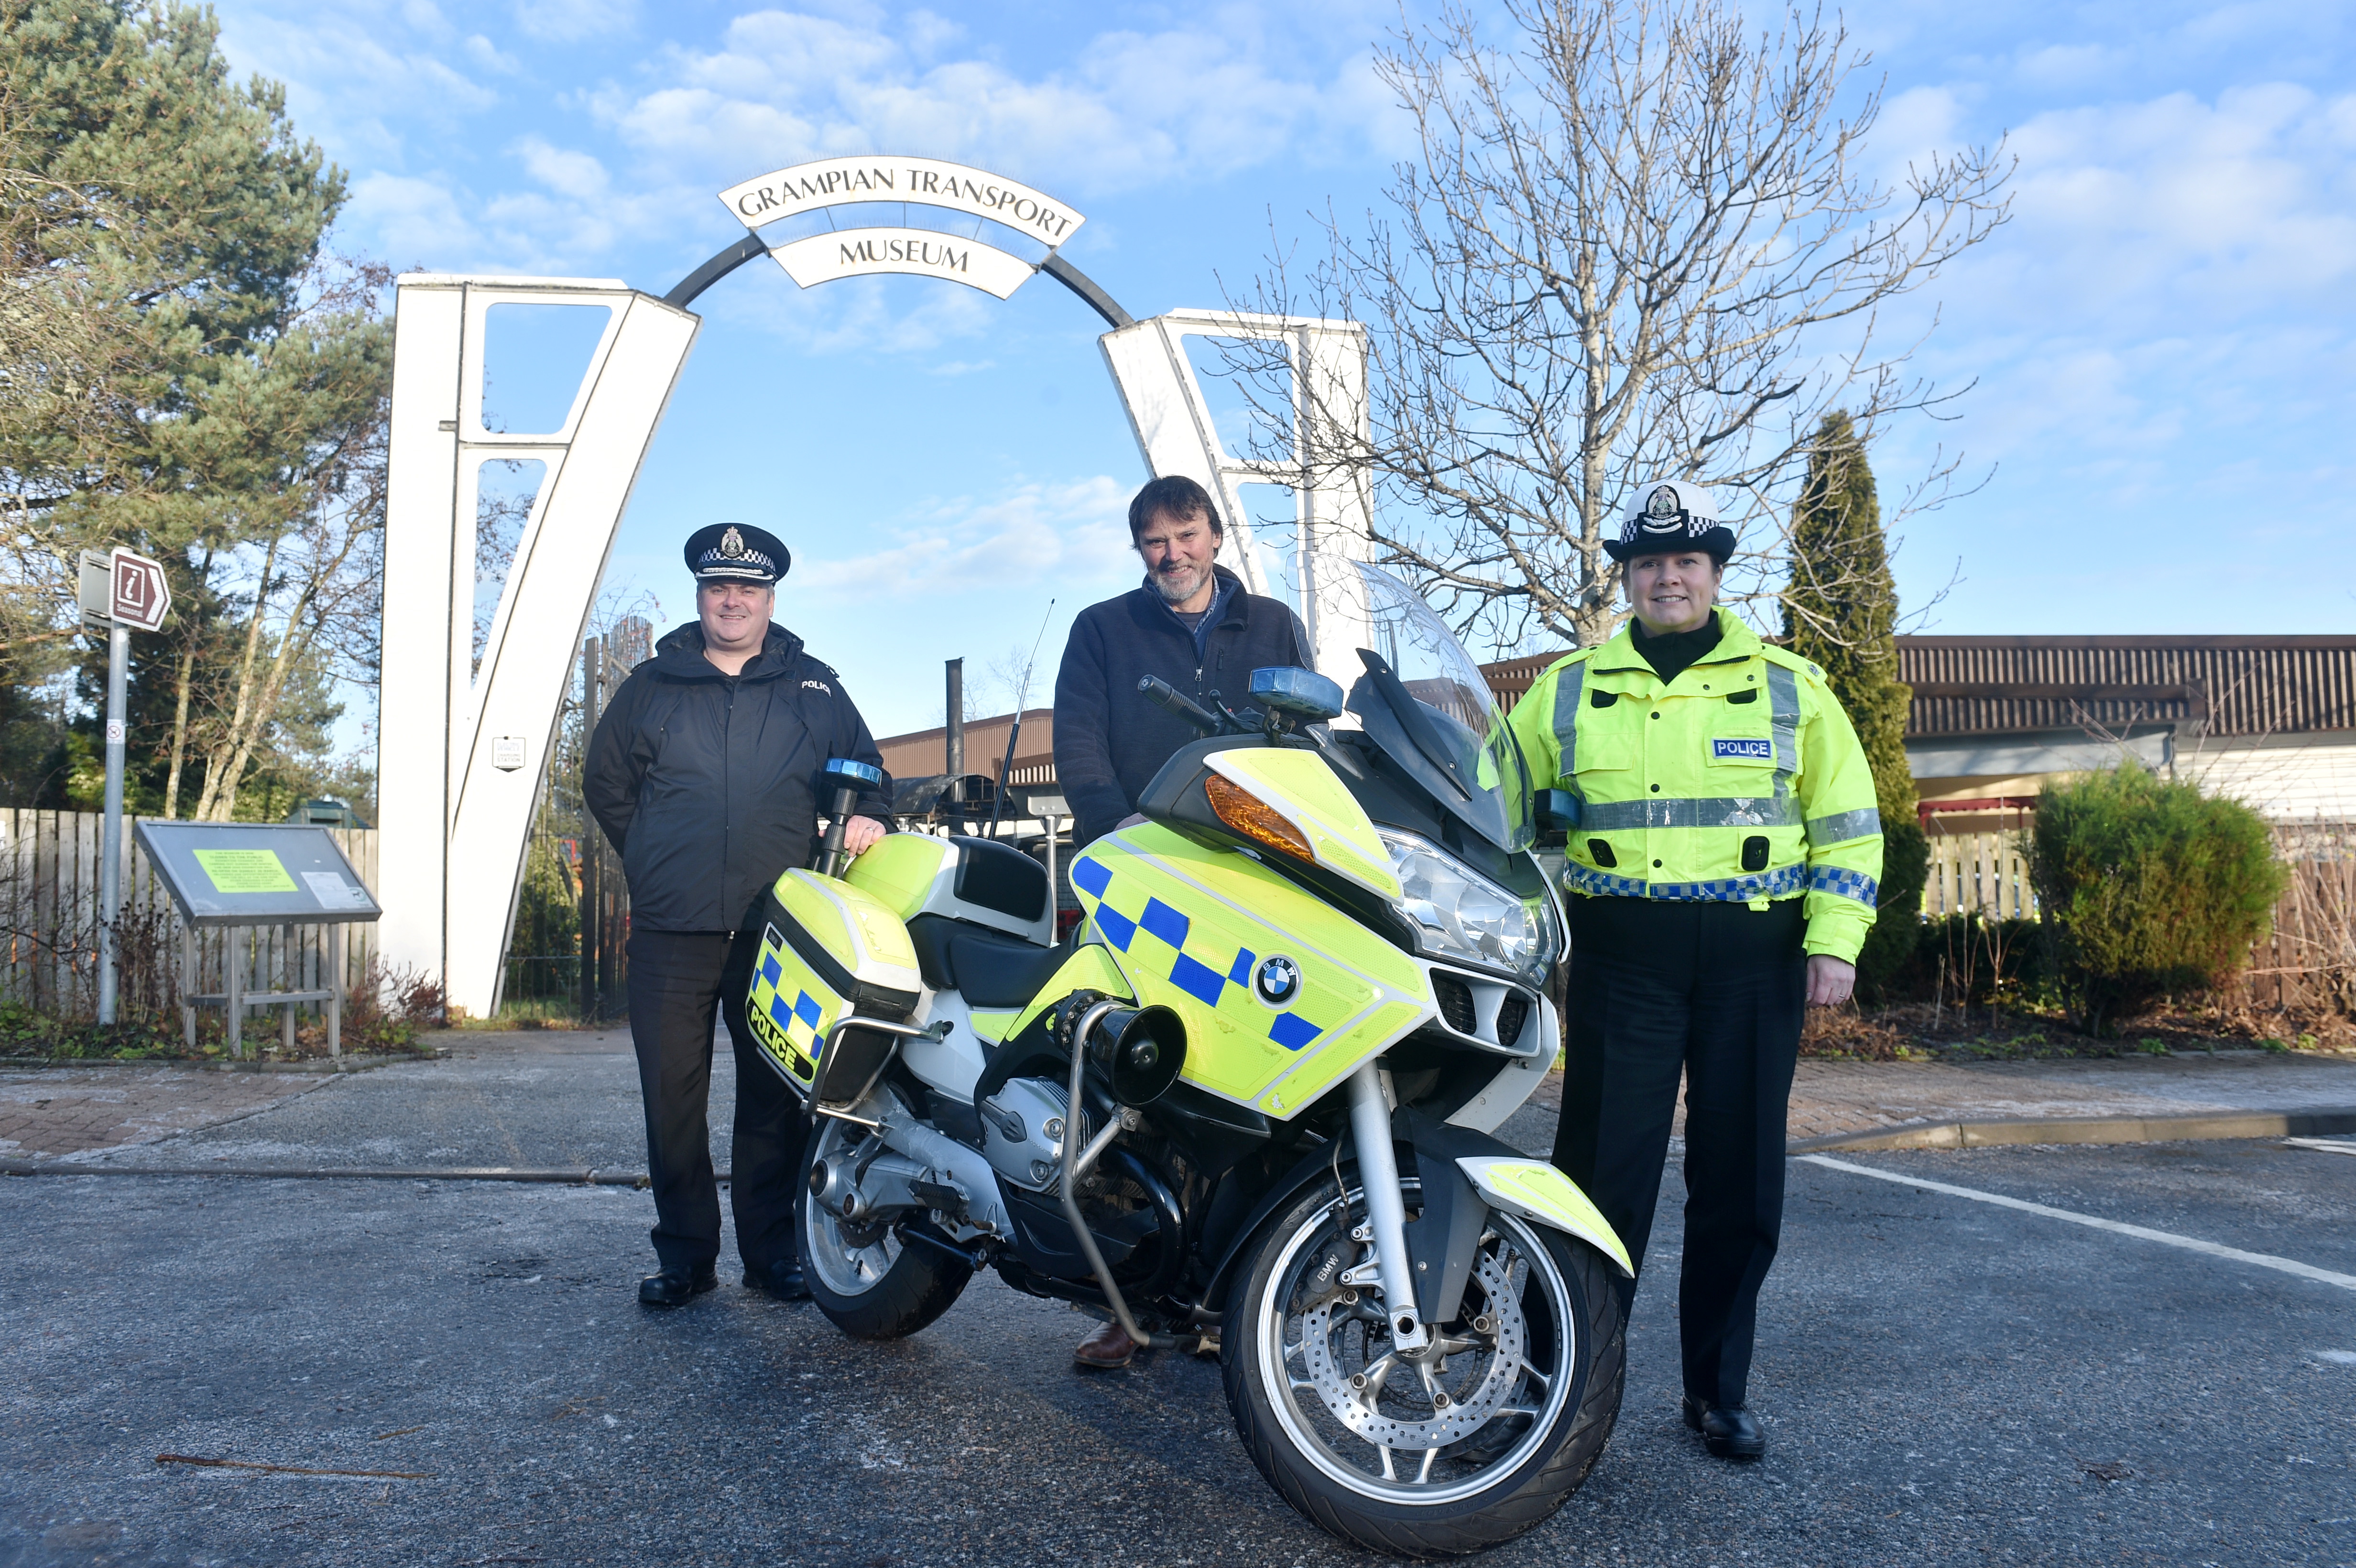 Pictured are from left, Superintendent Stewart Mackie from Police Scotland,  Mike Ward MBE, Curator, Grampian Transport Museum and Superintendent Louise Blakelock. 
A Police motorcycle was donated to Grampian Transport Museum, Alford. The 'retired' motorcycle, a 2009 BMW R1200RT, has reached the end of its service with the Road Policing Unit and will join an ex-Grampian Police 1985 Rover SD1 Vitesse that is already on display at the museum. 
Picture by DARRELL BENNS 
Pictured on 16/12/2019   
CR0017601 / CR0017539